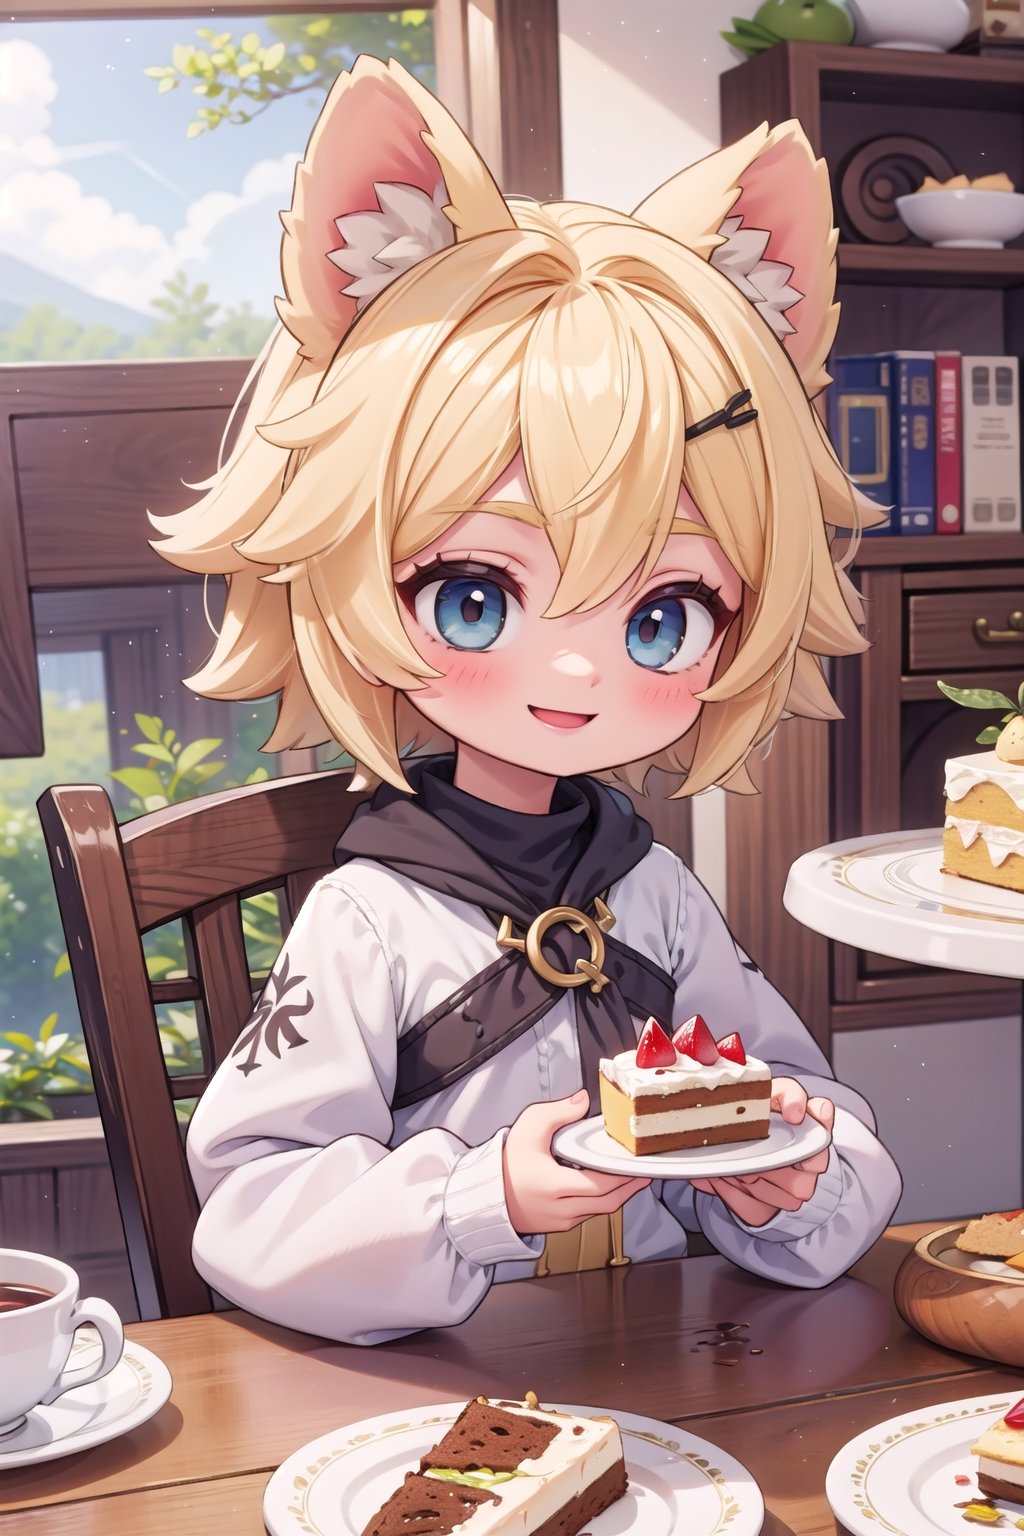 A girl with short blonde hair with brown animal ears sat on a chair in front of the dining table, smiling happily while enjoying a piece of cake.